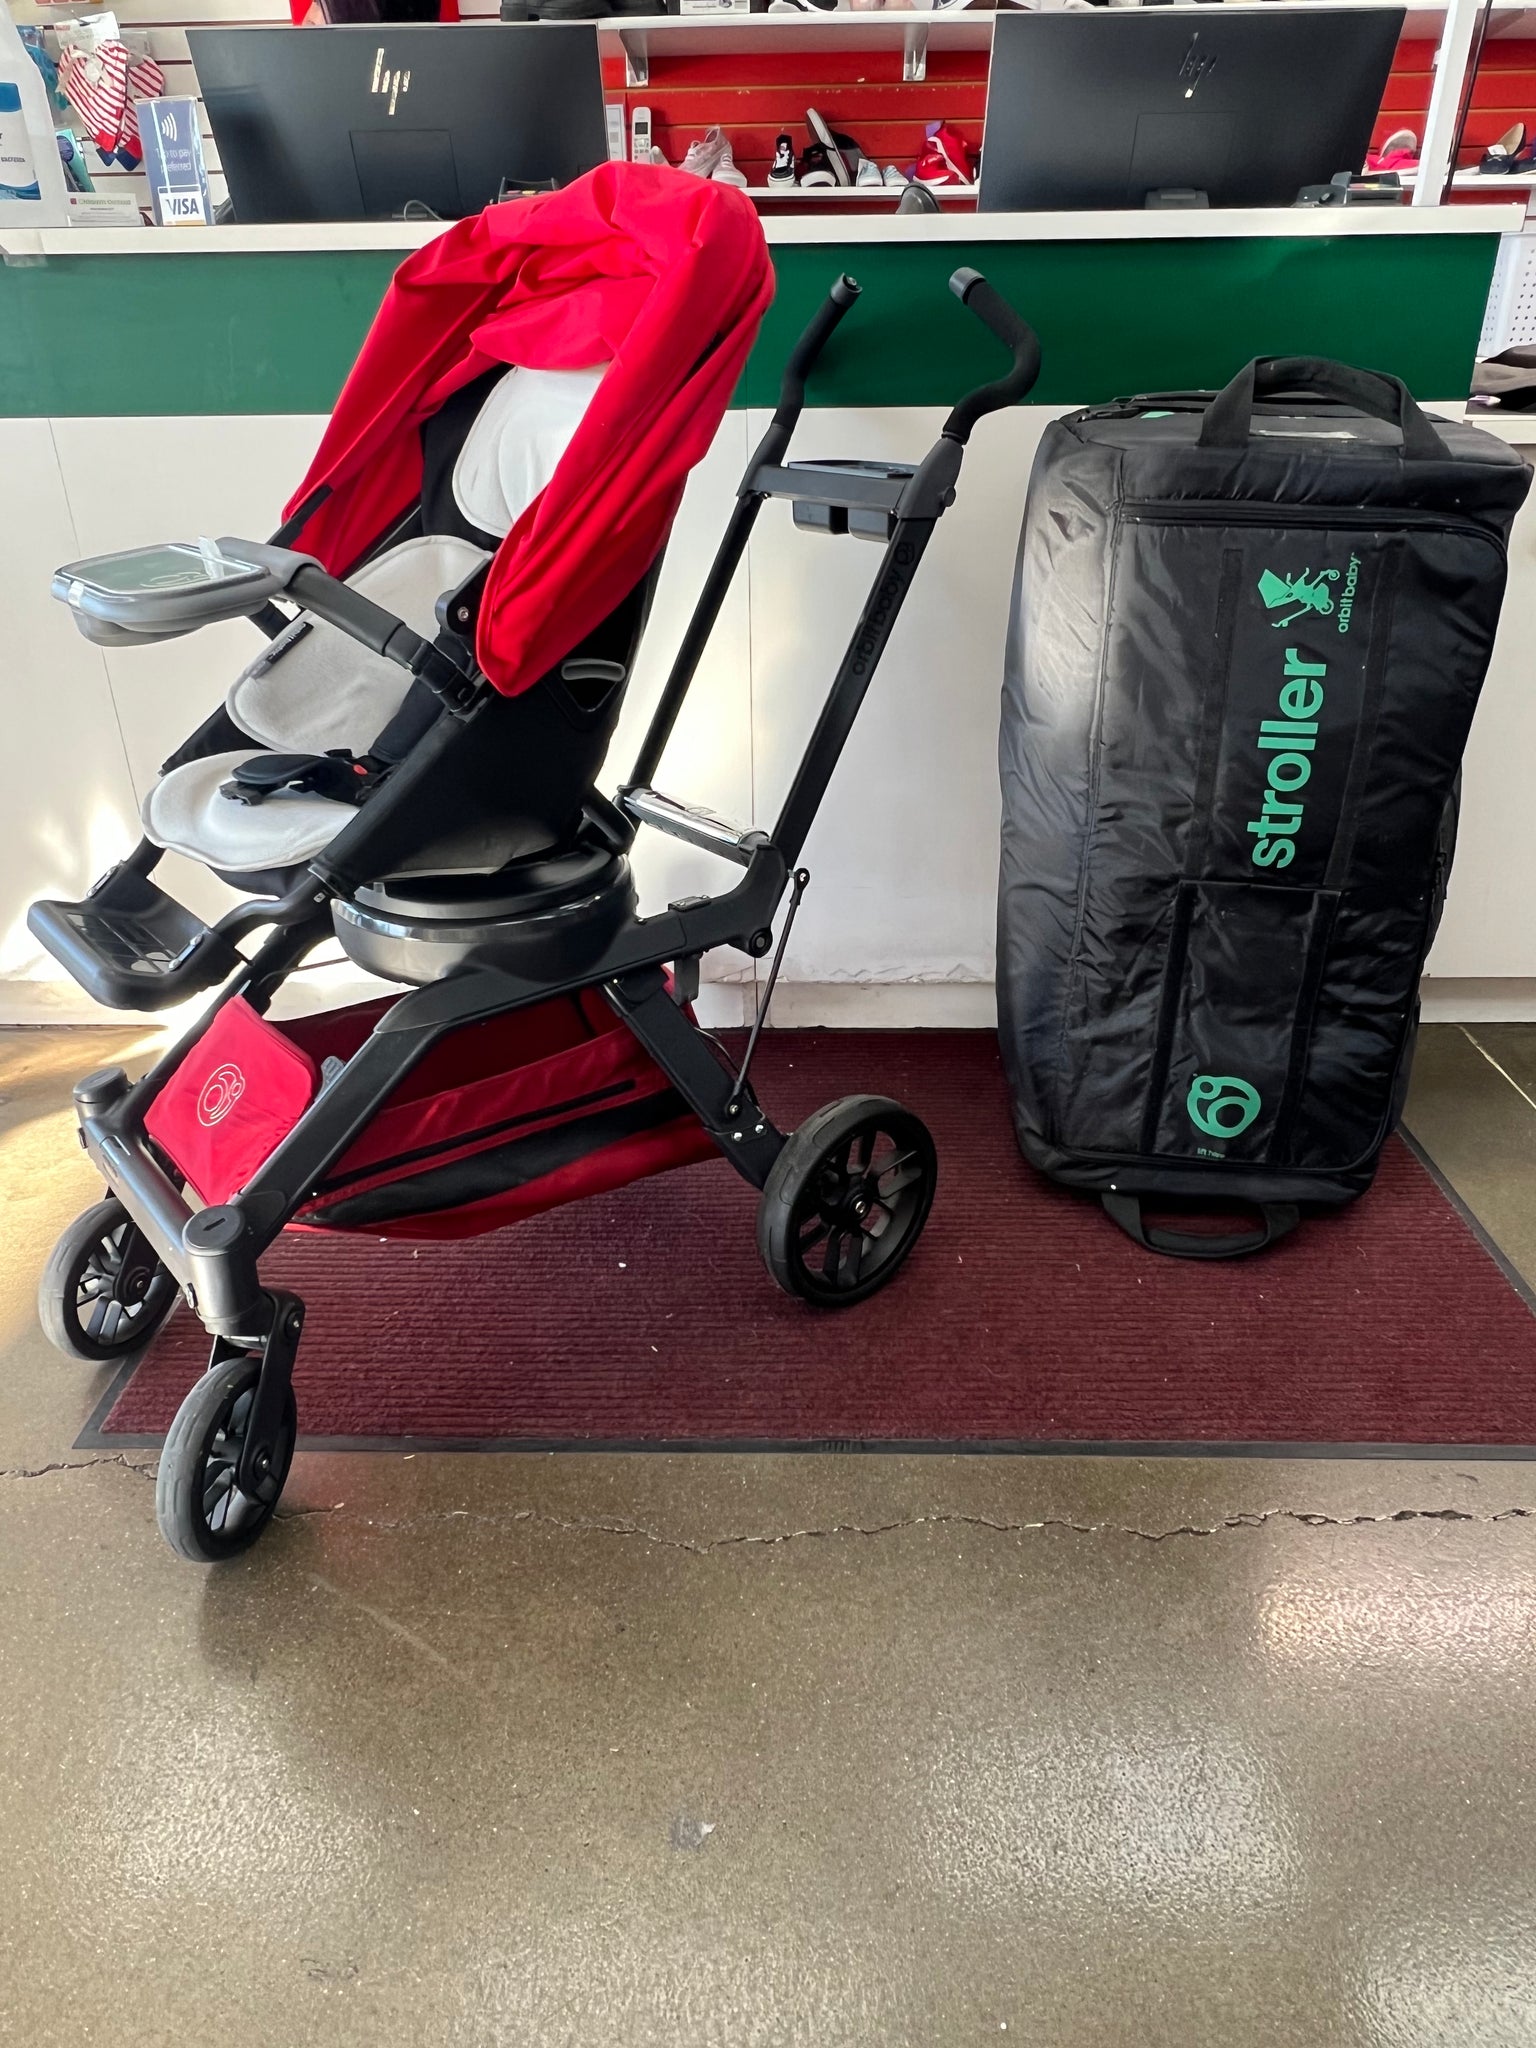 In Store P/U Only- Orbit Stroller and Carry Bag